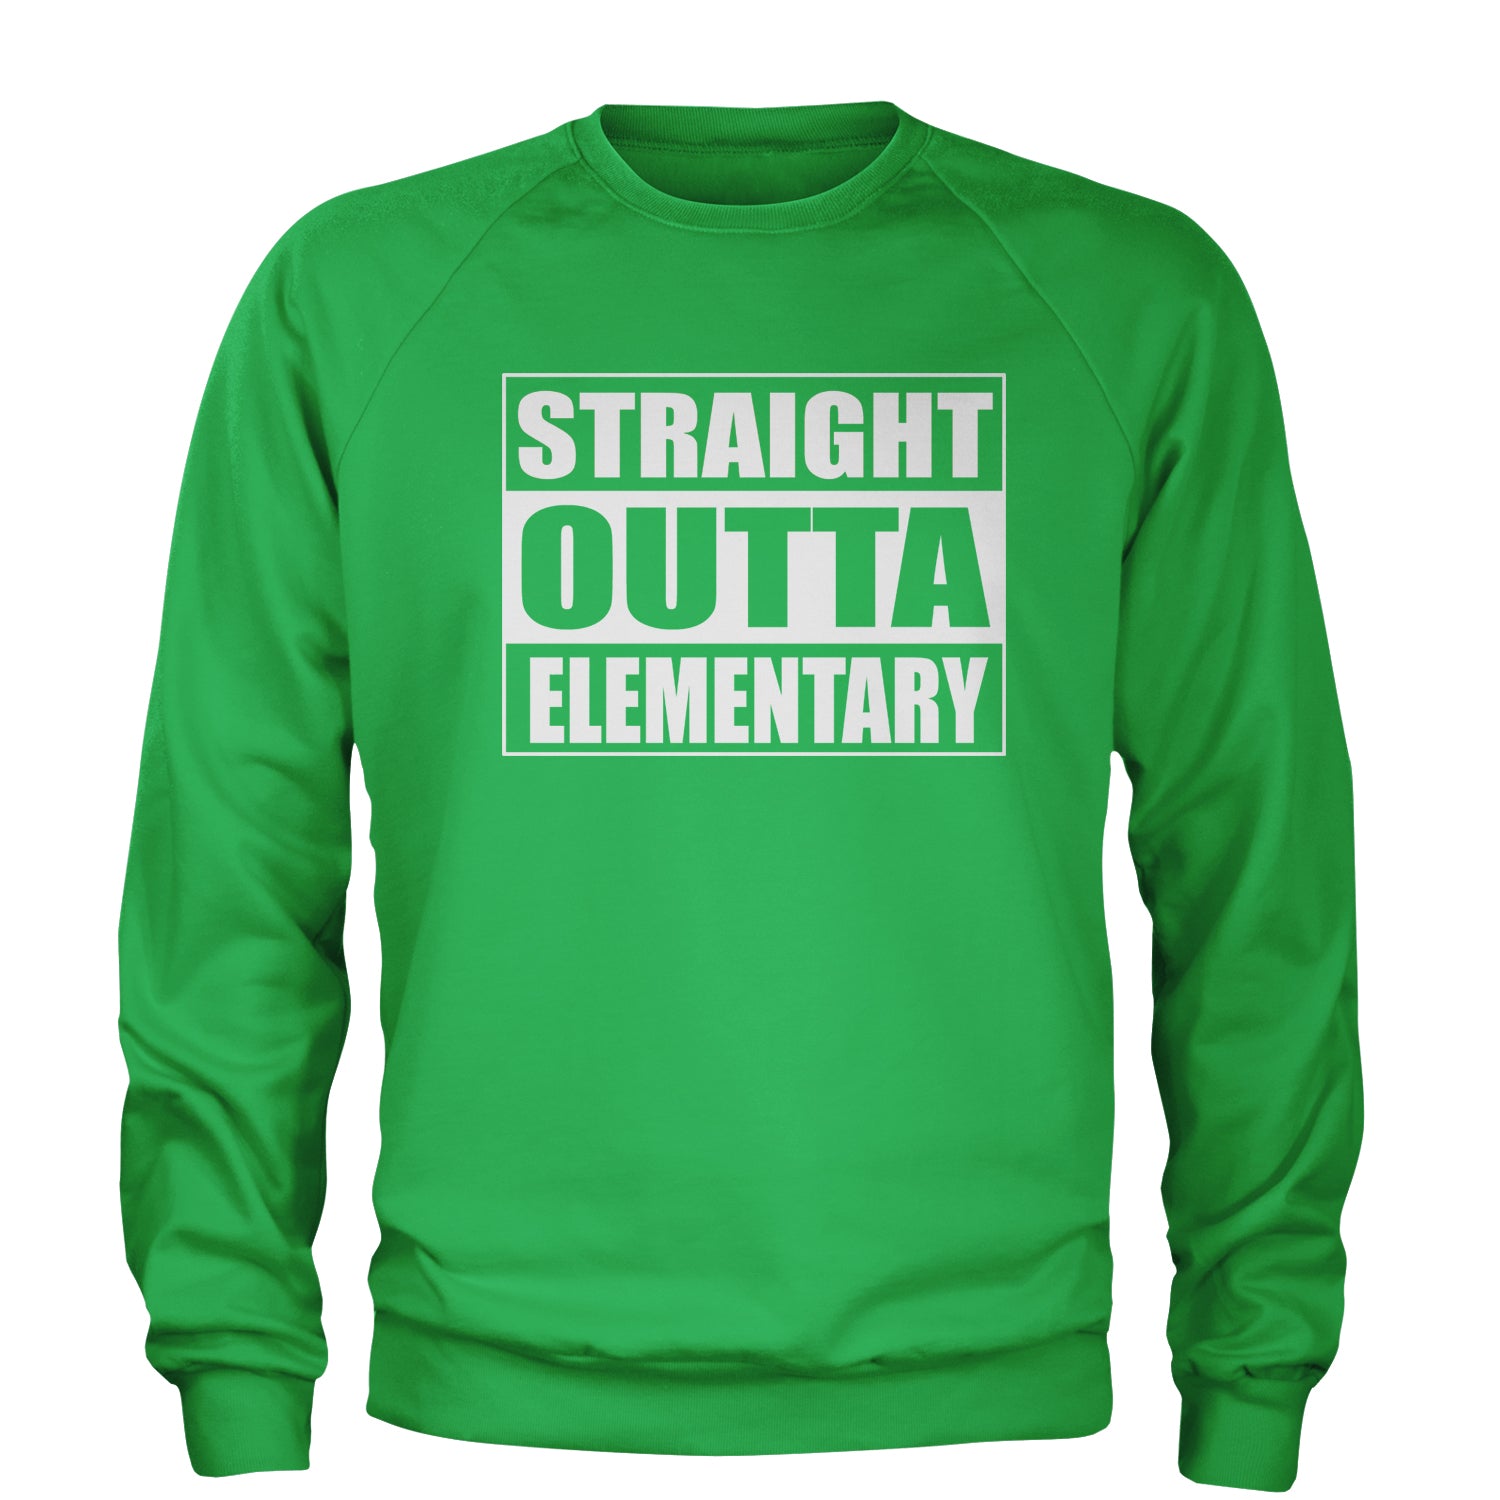 Straight Outta Elementary Adult Crewneck Sweatshirt 2020, 2021, 2022, class, of, quarantine, queen by Expression Tees